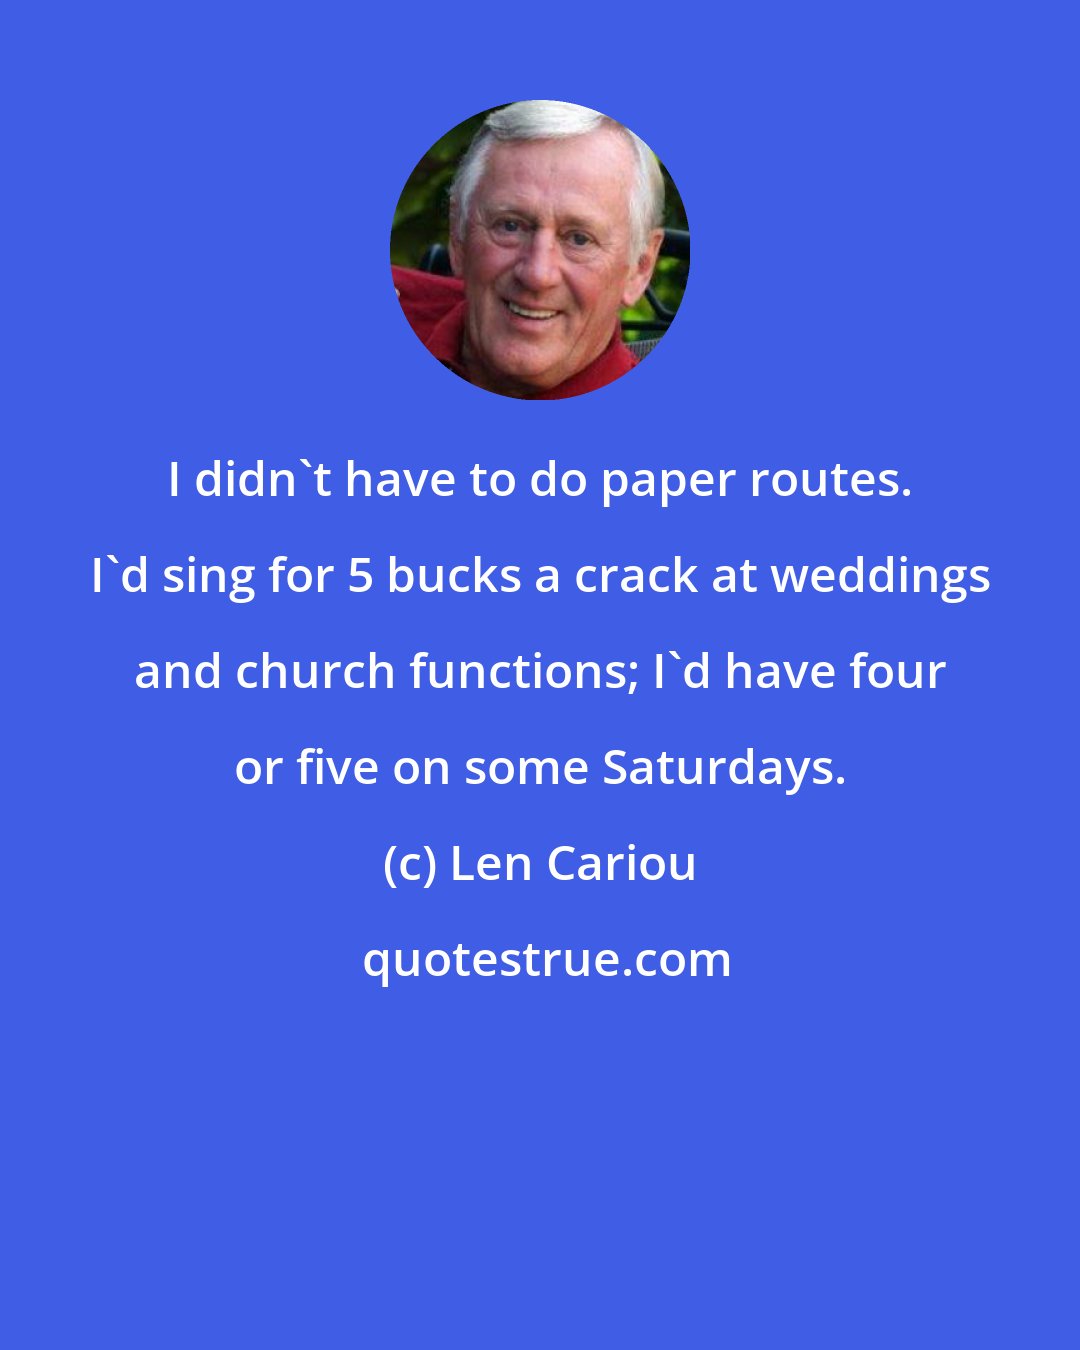 Len Cariou: I didn't have to do paper routes. I'd sing for 5 bucks a crack at weddings and church functions; I'd have four or five on some Saturdays.